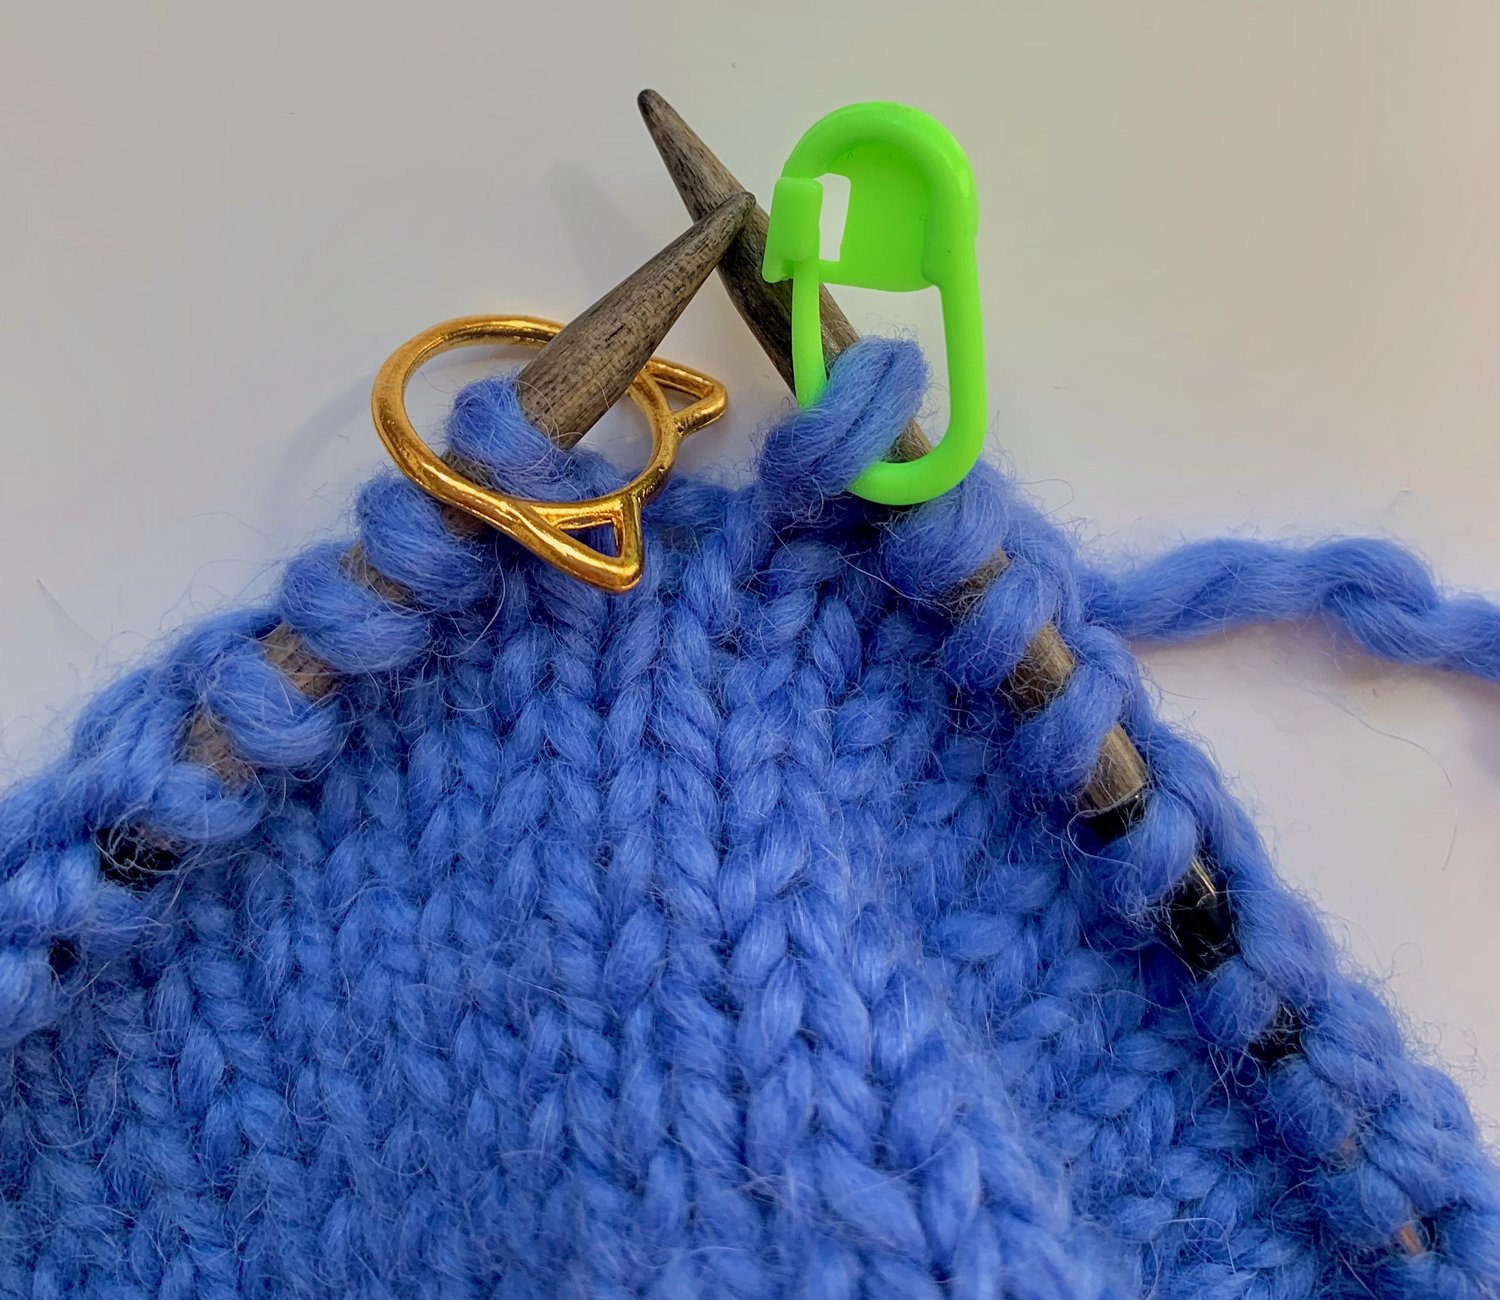 First Time Knitting: The Absolute Beginner's Guide See more